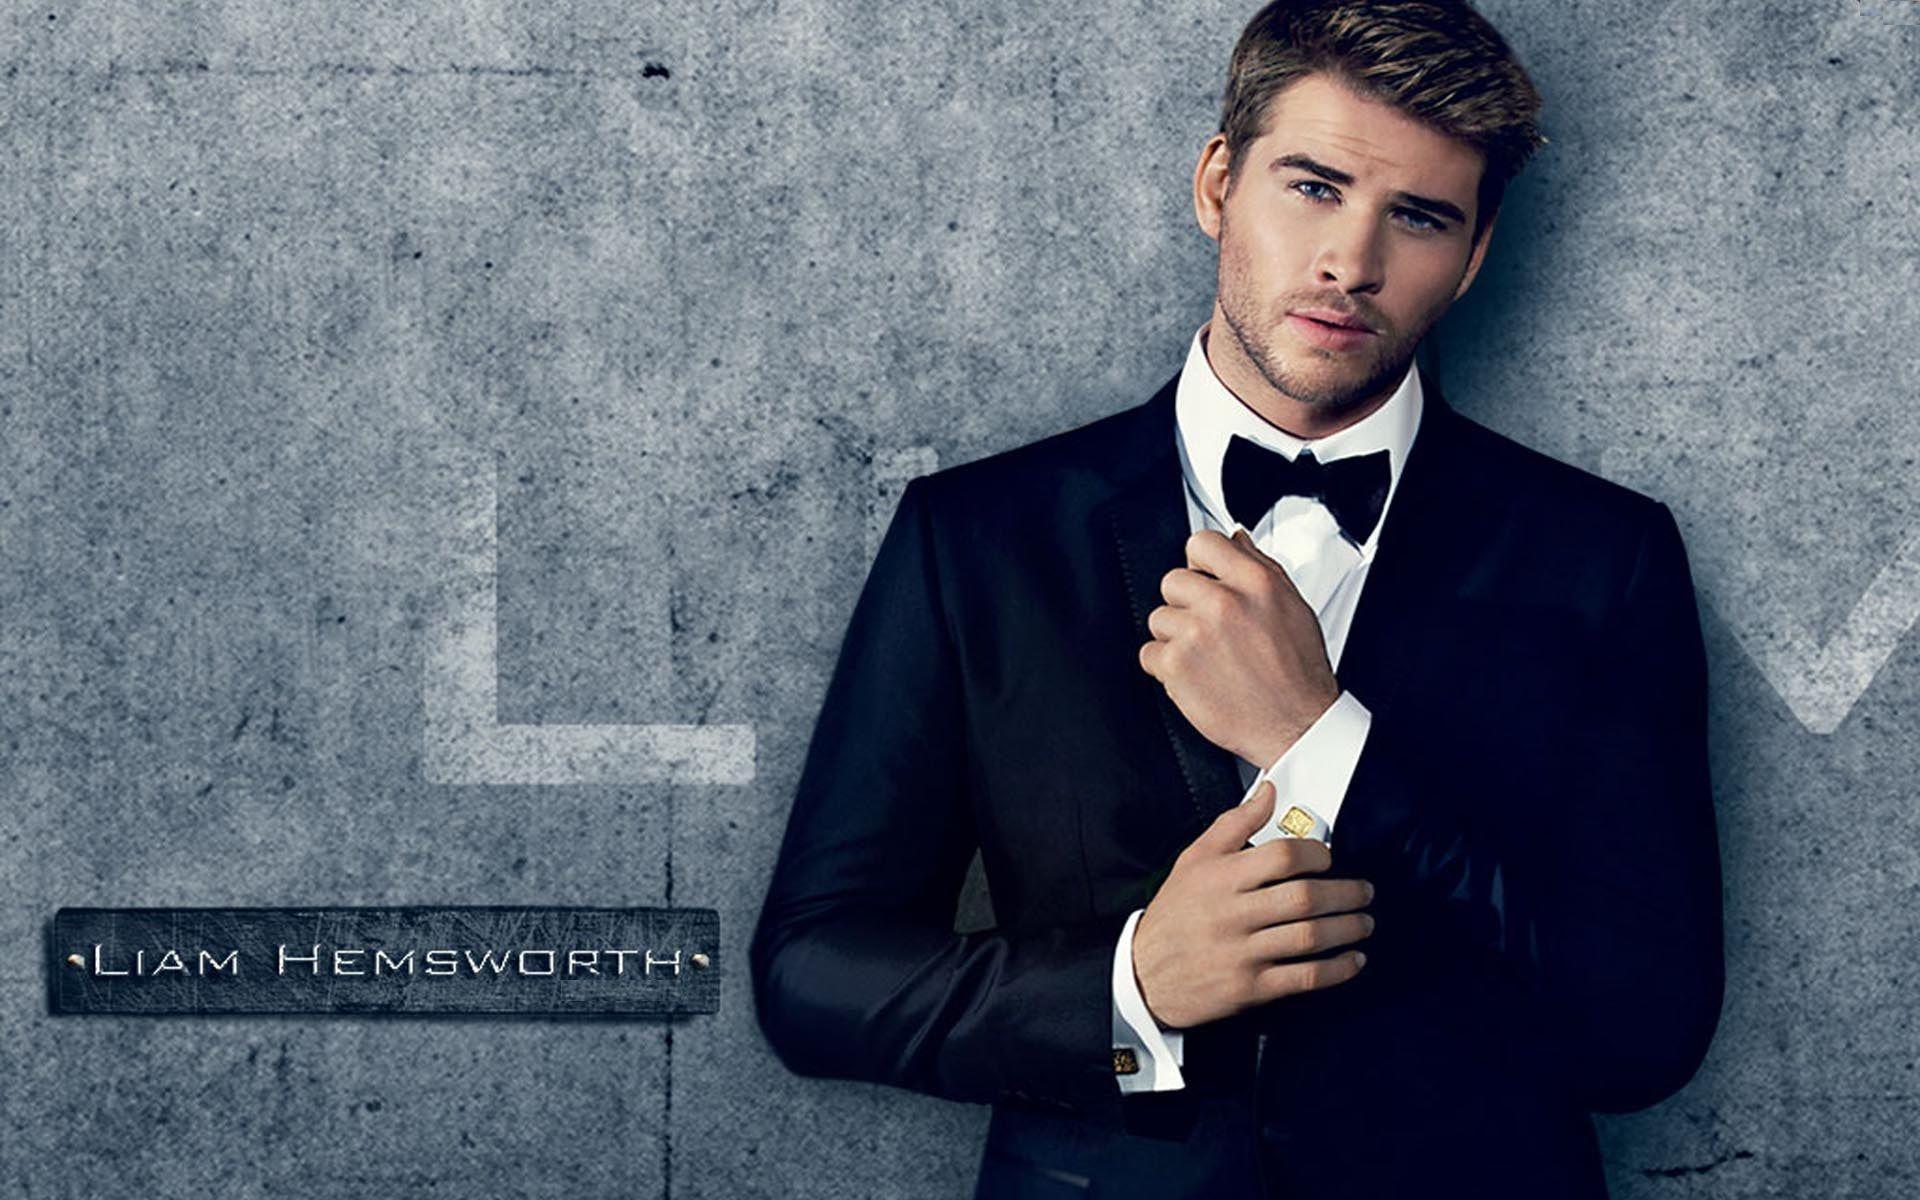 Liam Hemsworth Wallpaper High Resolution and Quality Download